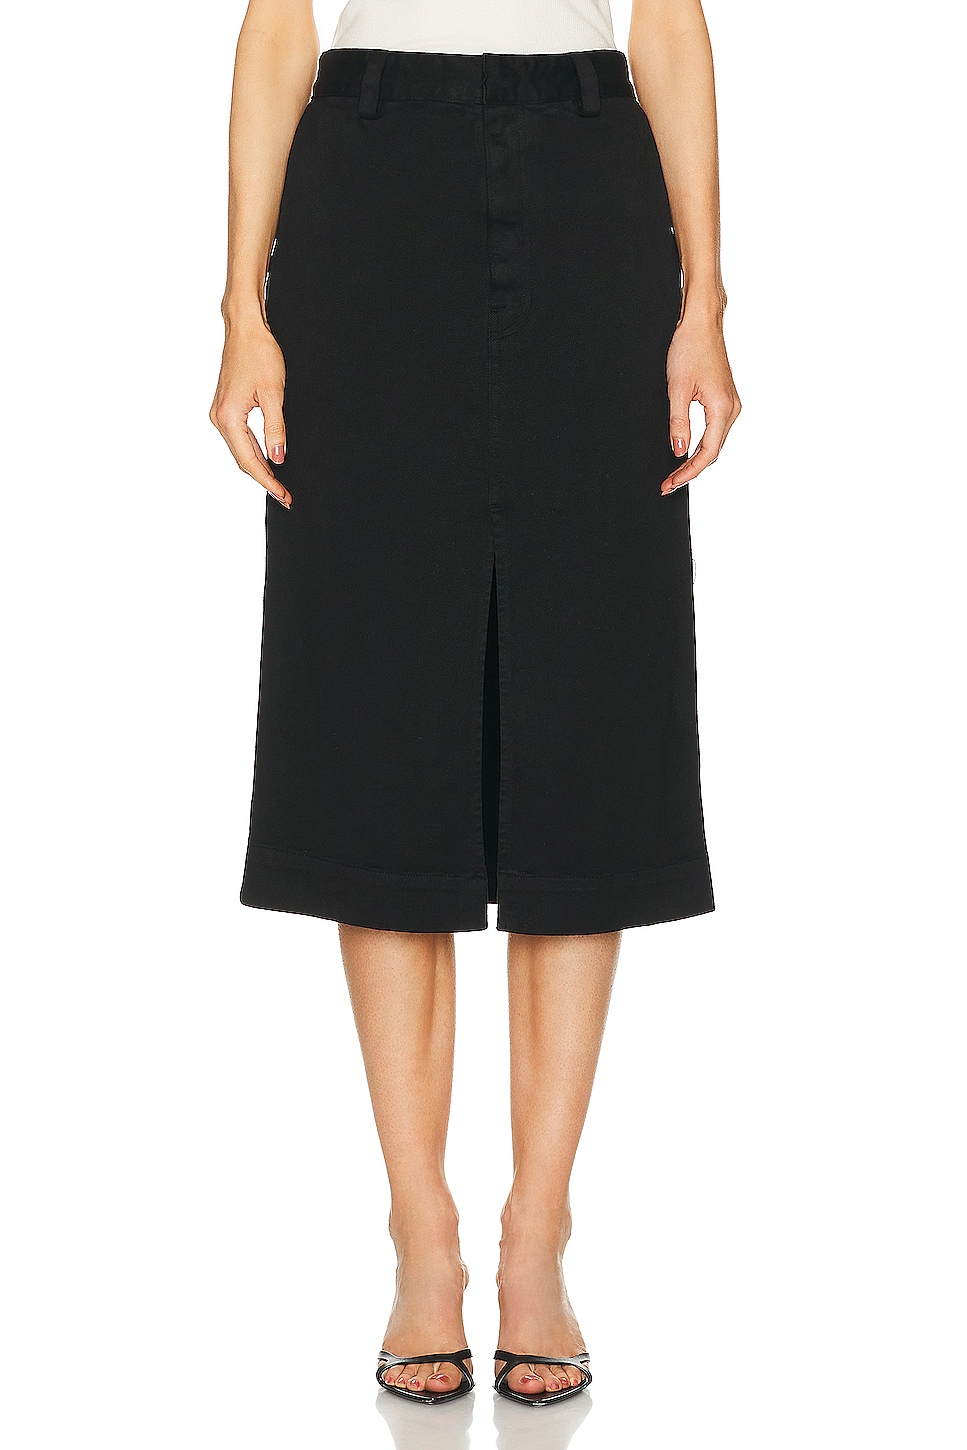 Image 1 of Enza Costa Soft Touch Slit Skirt in Black